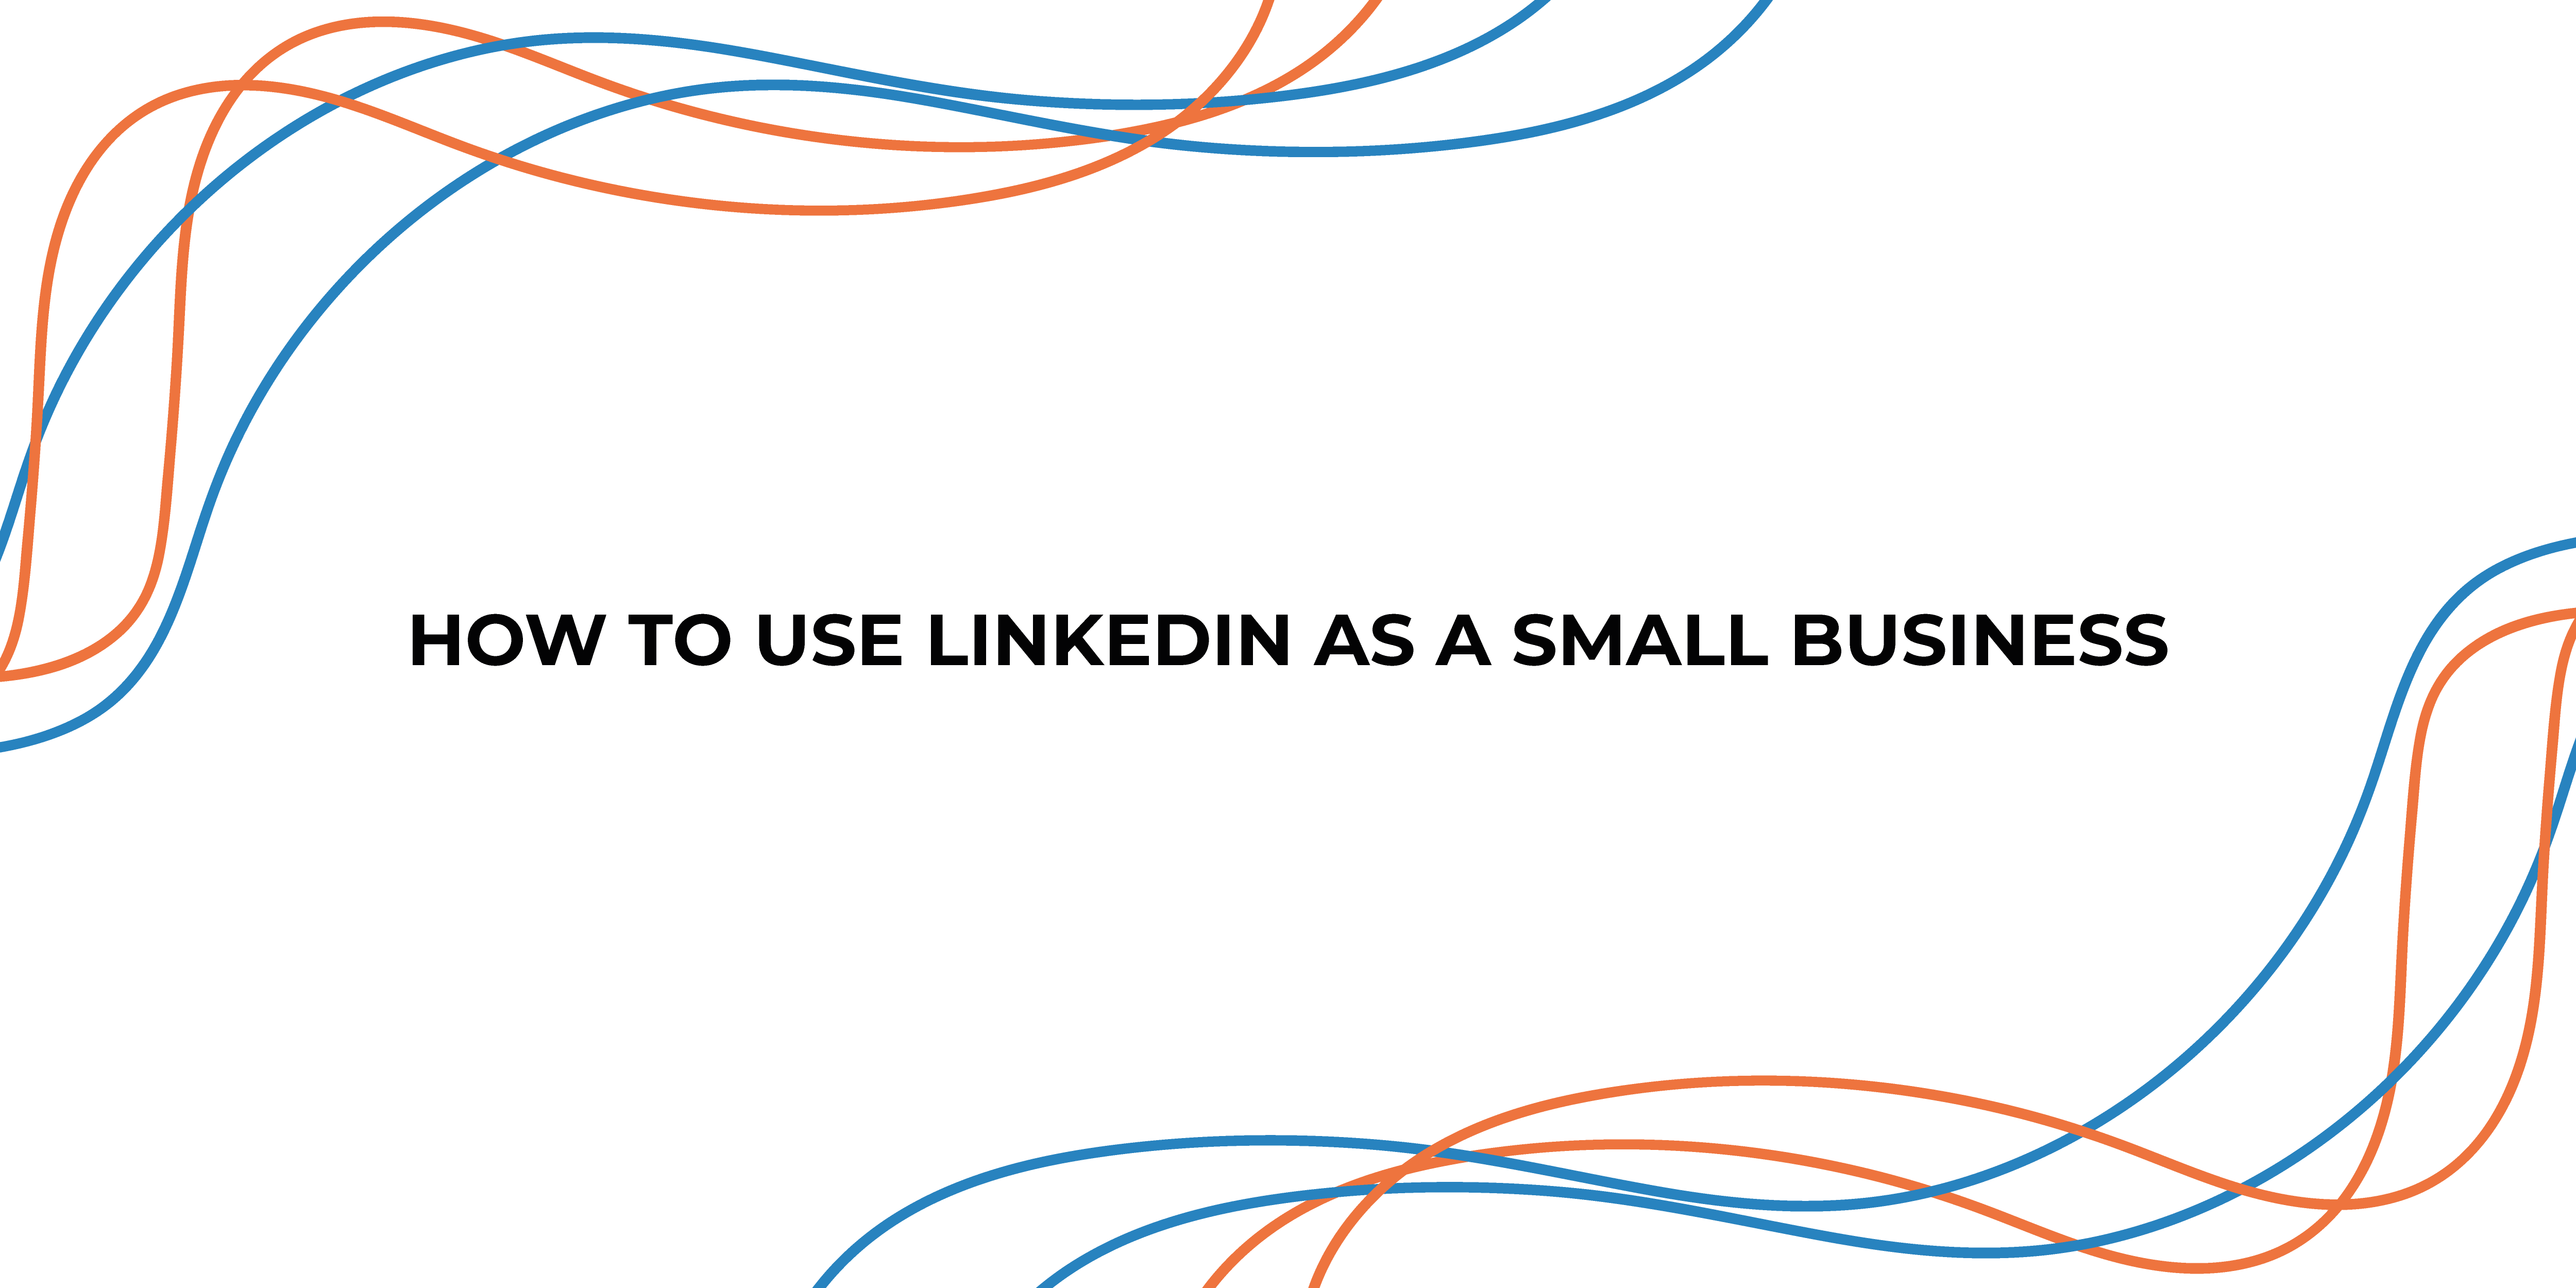 How to use LinkedIn as a small business